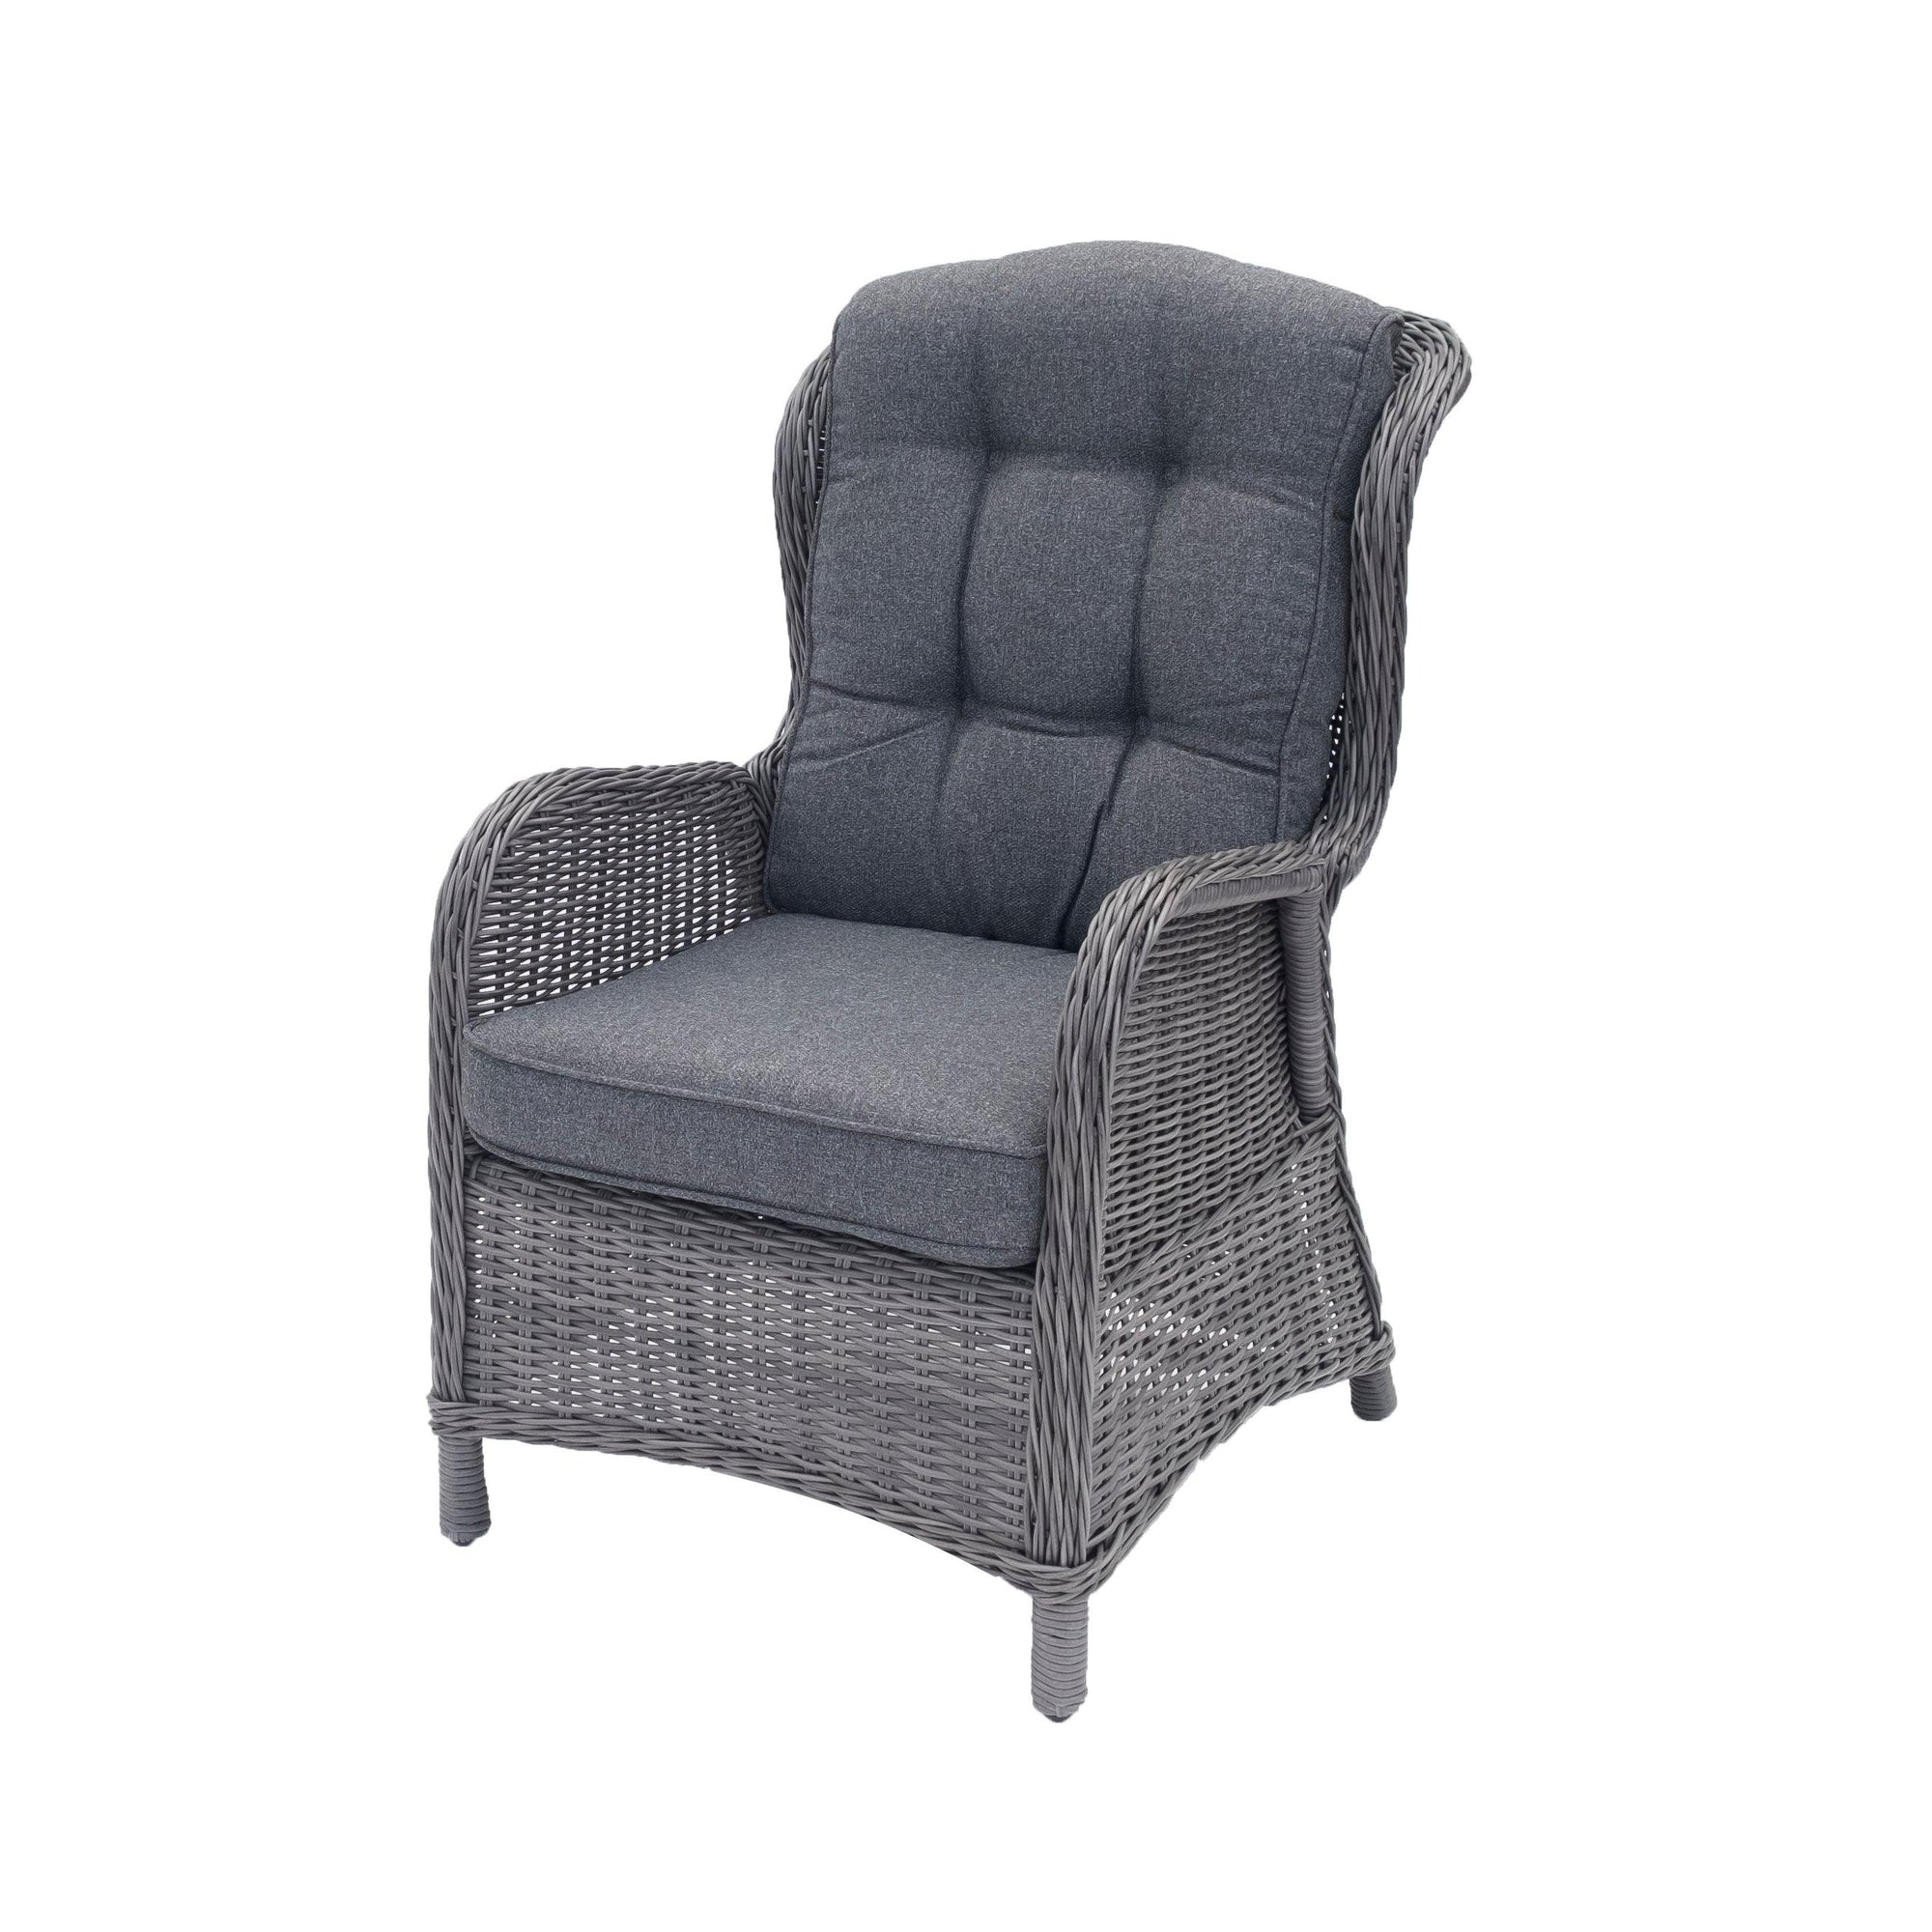 This exquisite chat set includes two reclining chairs, two ottomans, and one side table, all with a stunning aluminum frame and resin wicker in Anthracite and Dark Grey cushions. The chairs measure 34.6in x 24.8in x 40.5in, the footstools are 20in x 19.6in x 14.6in, and the table is 19.6in x 21.6in.